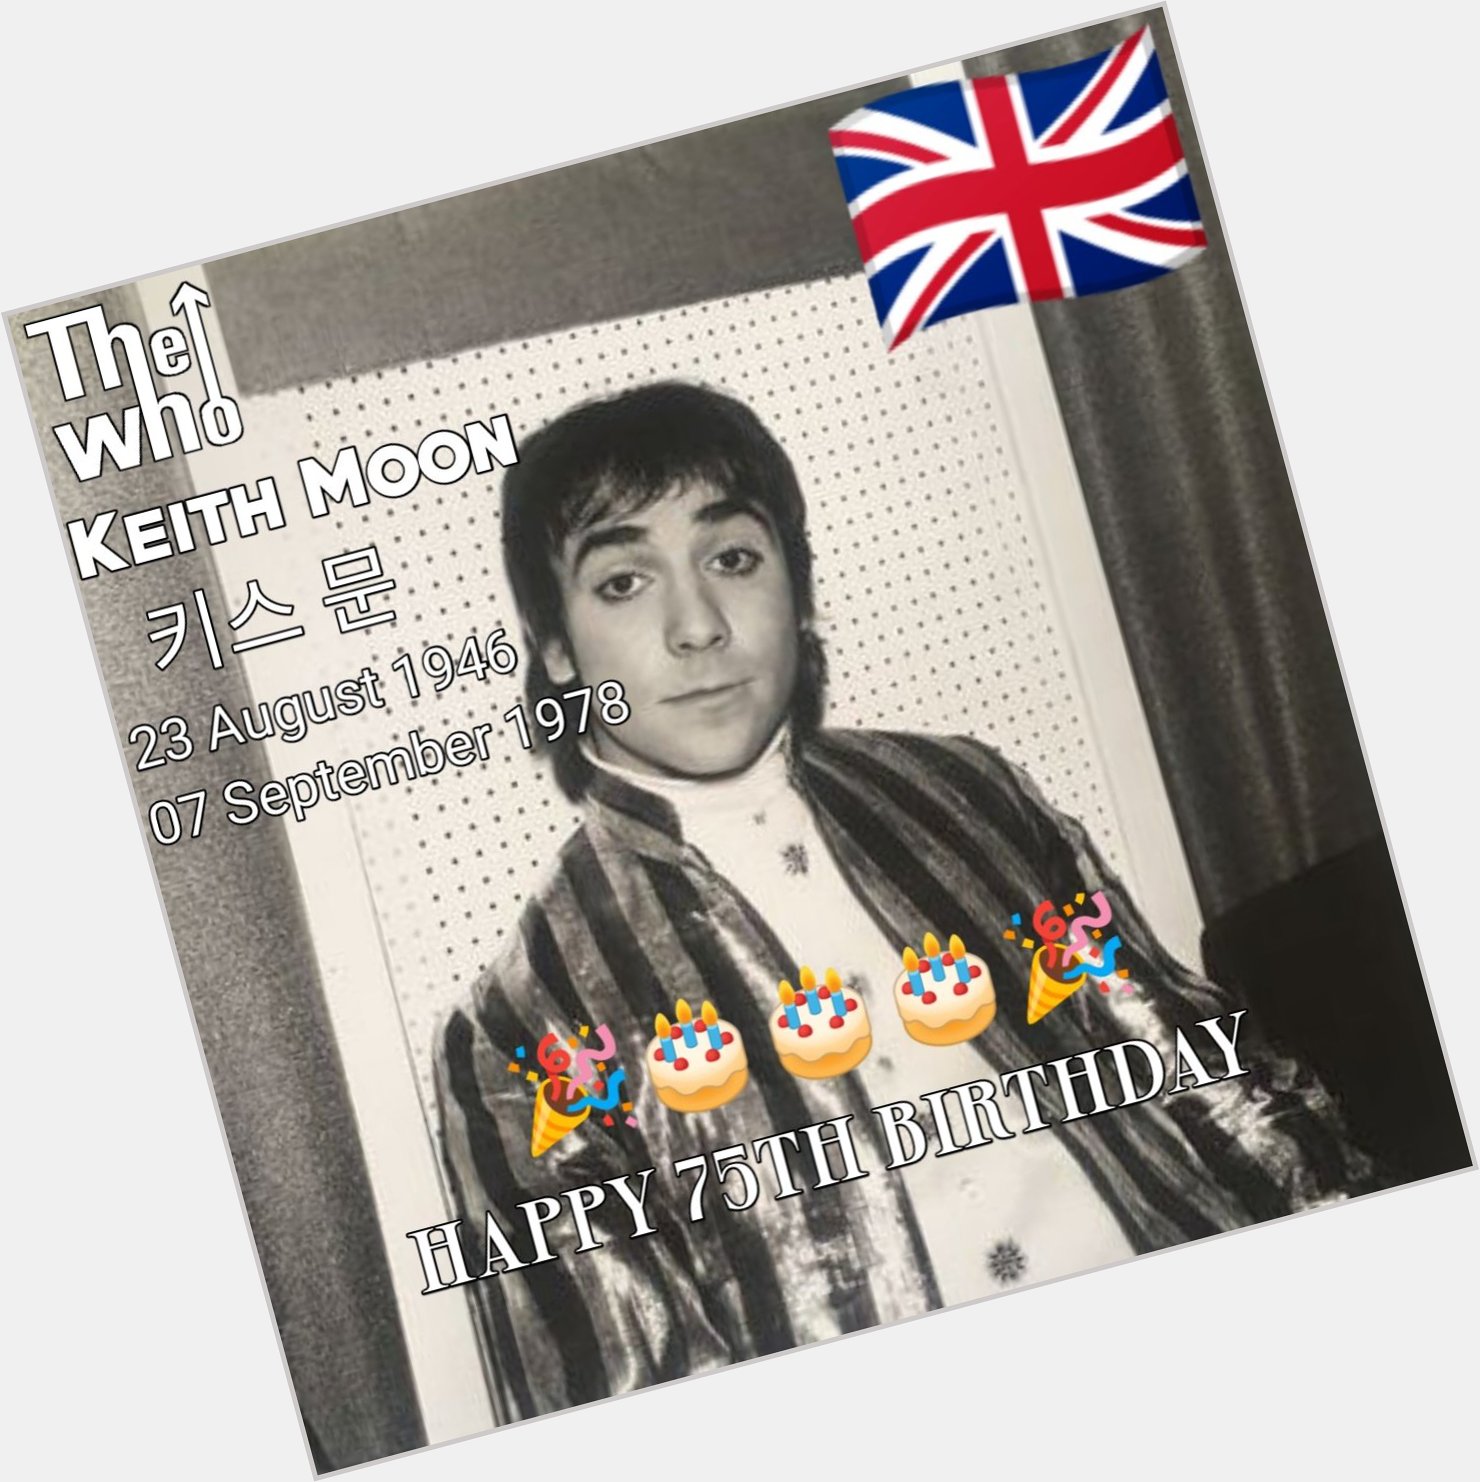   Happy Birthday Legendary Drummer The Who,sir Keith Moon      